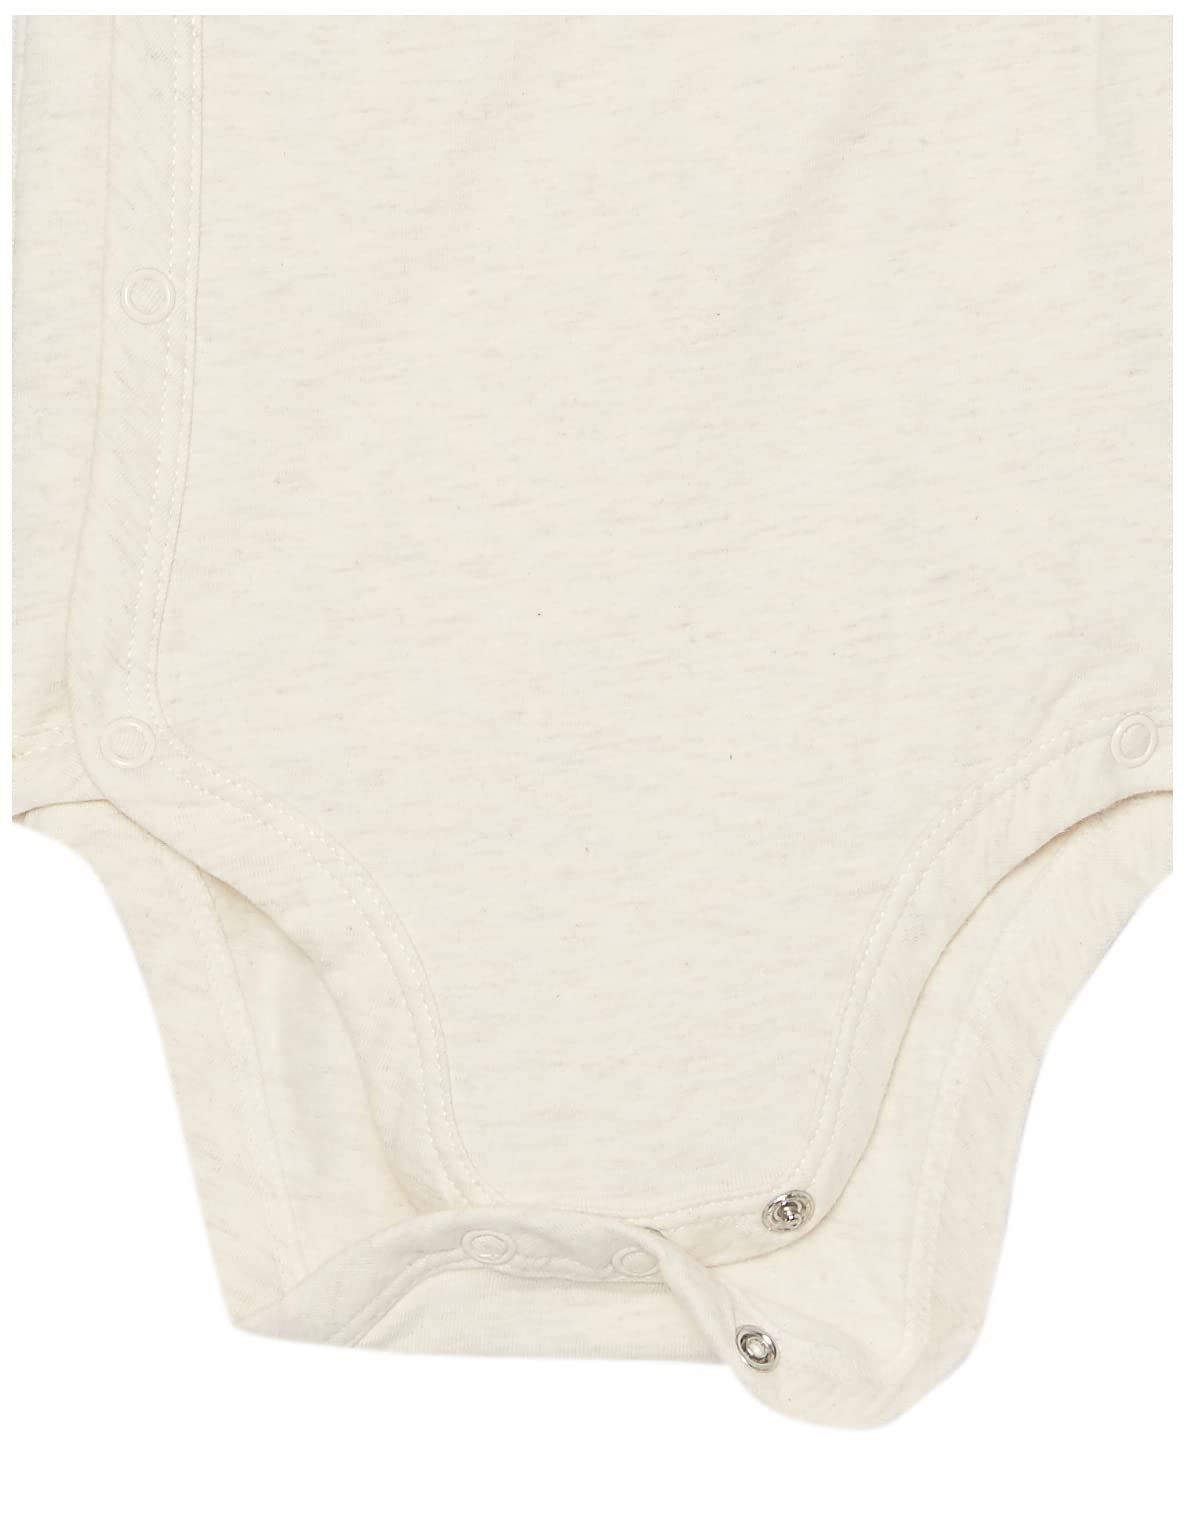 Amazon Essentials Unisex Babies' Cotton Long-Sleeve Side Snap Bodysuit (Previously Amazon Aware), Pack of 3